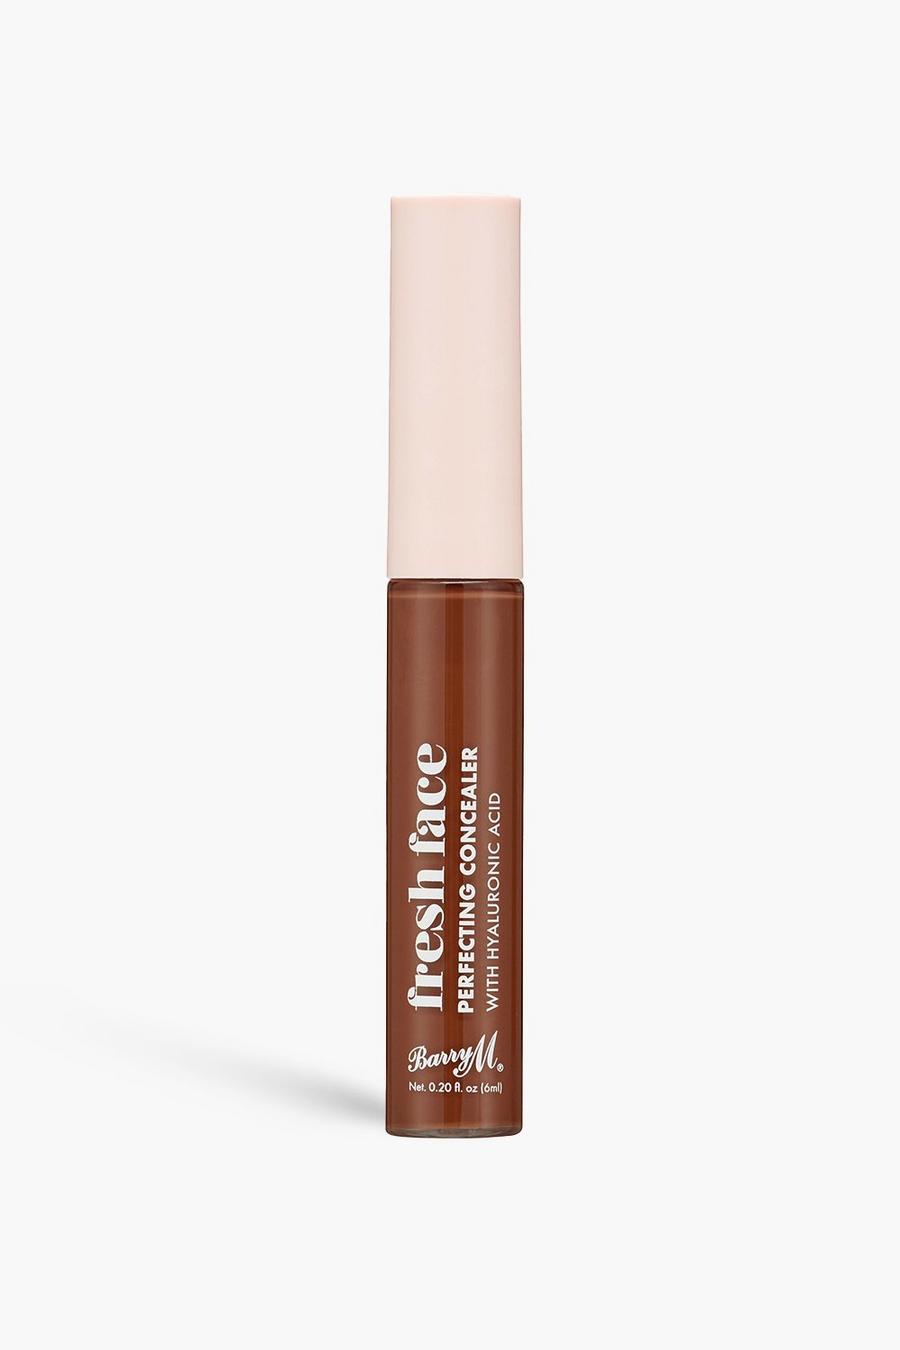 Barry M - Correttore Fresh Face Perfecting Concealer 19, Brown marrone